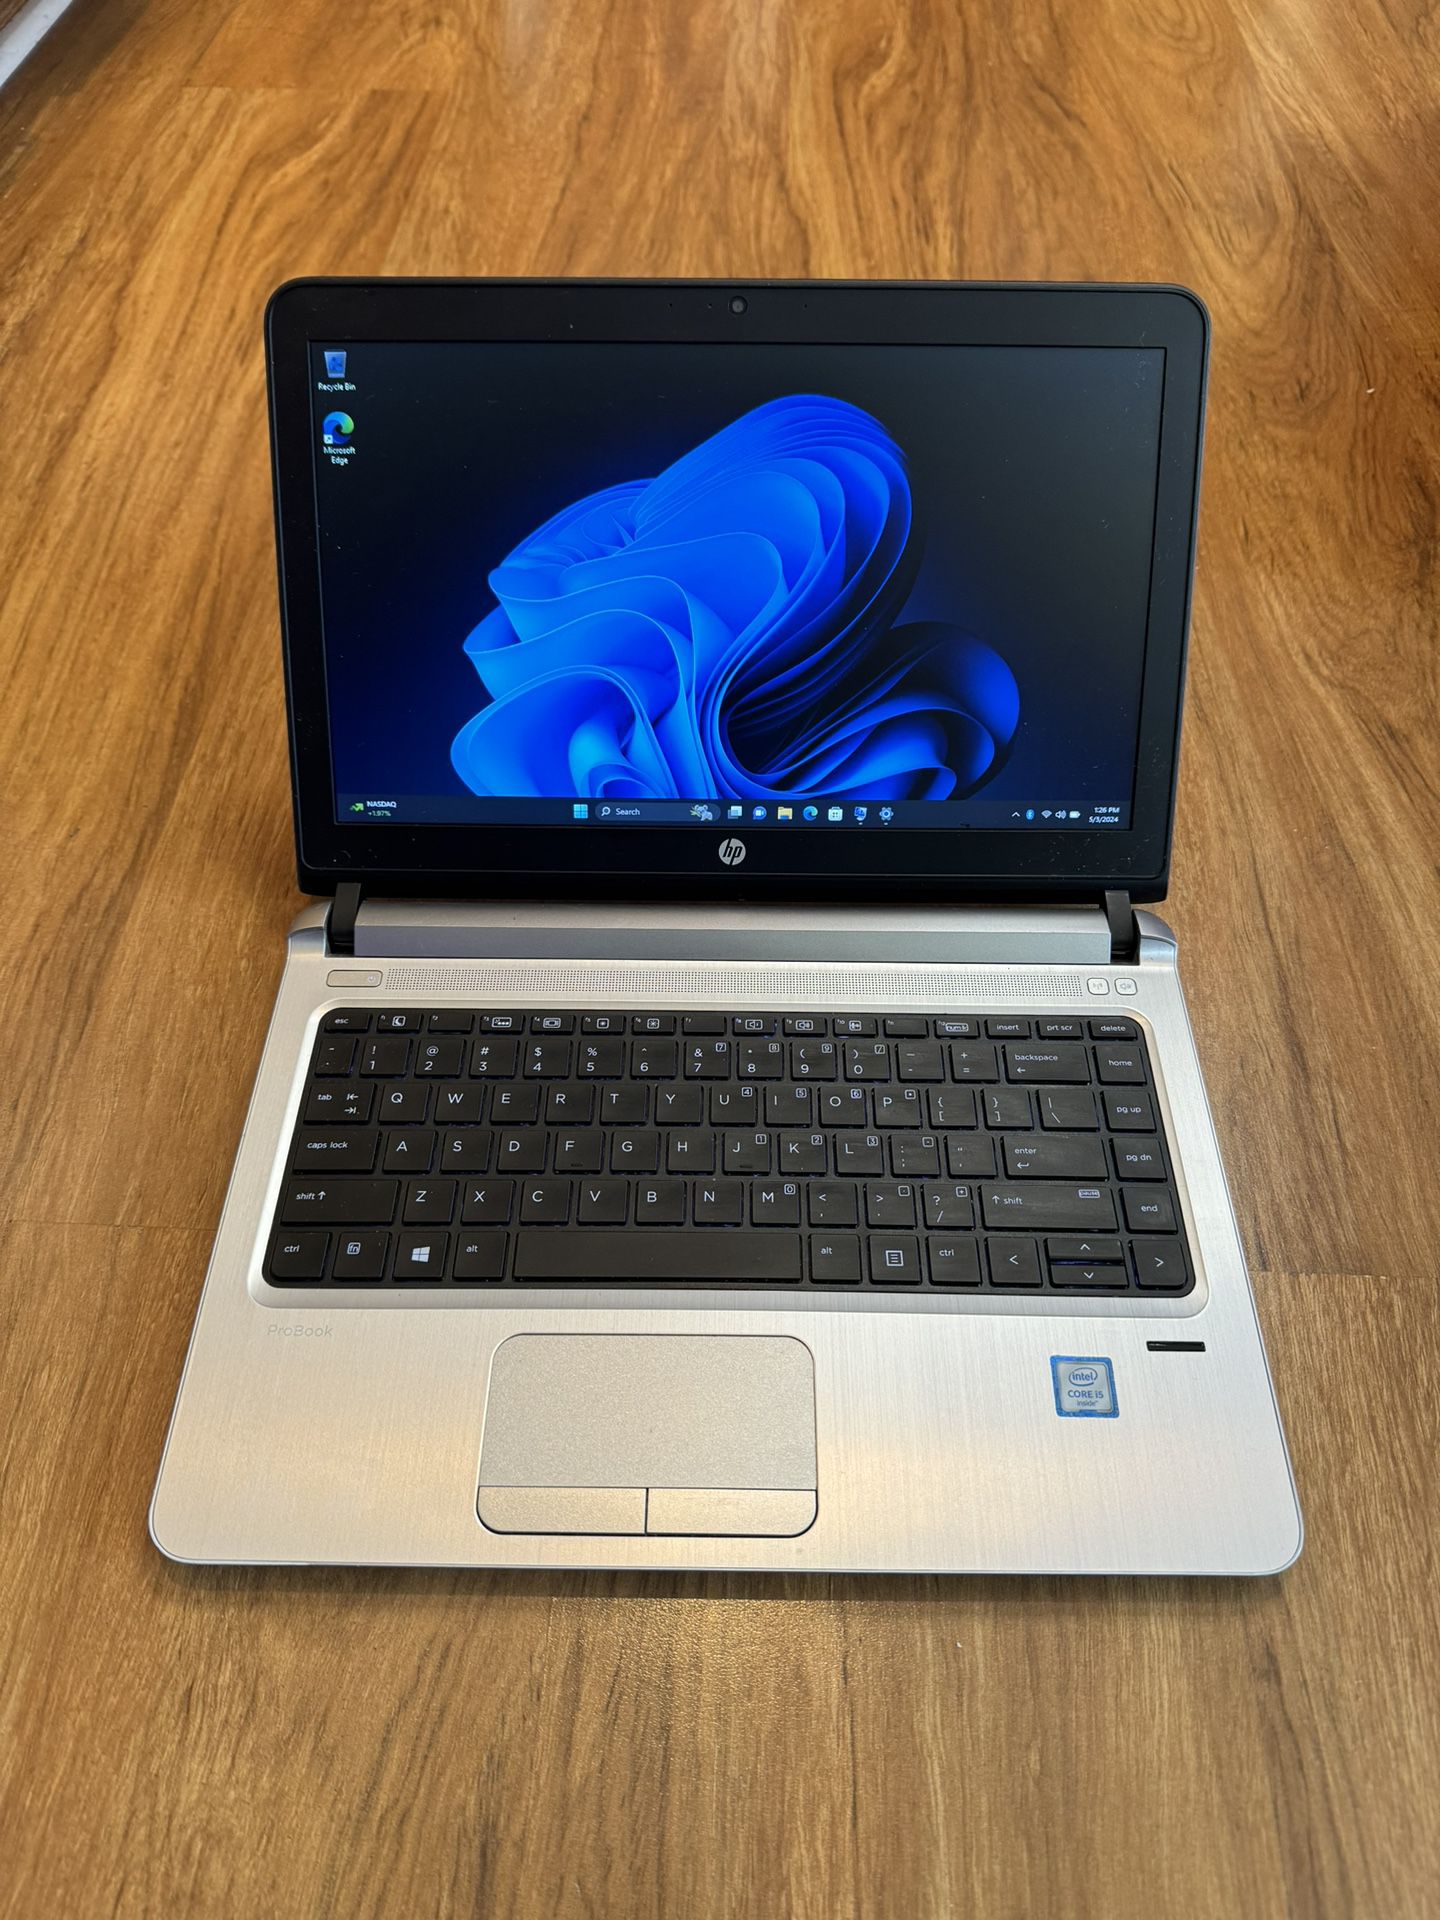 HP ProBook 430 G3 core i5 6th gen 8GB Ram 256GB SSD Windows 11 Pro 14.1” FHD Screen Laptop with charger in Excellent Working condition!!!!  Specificat